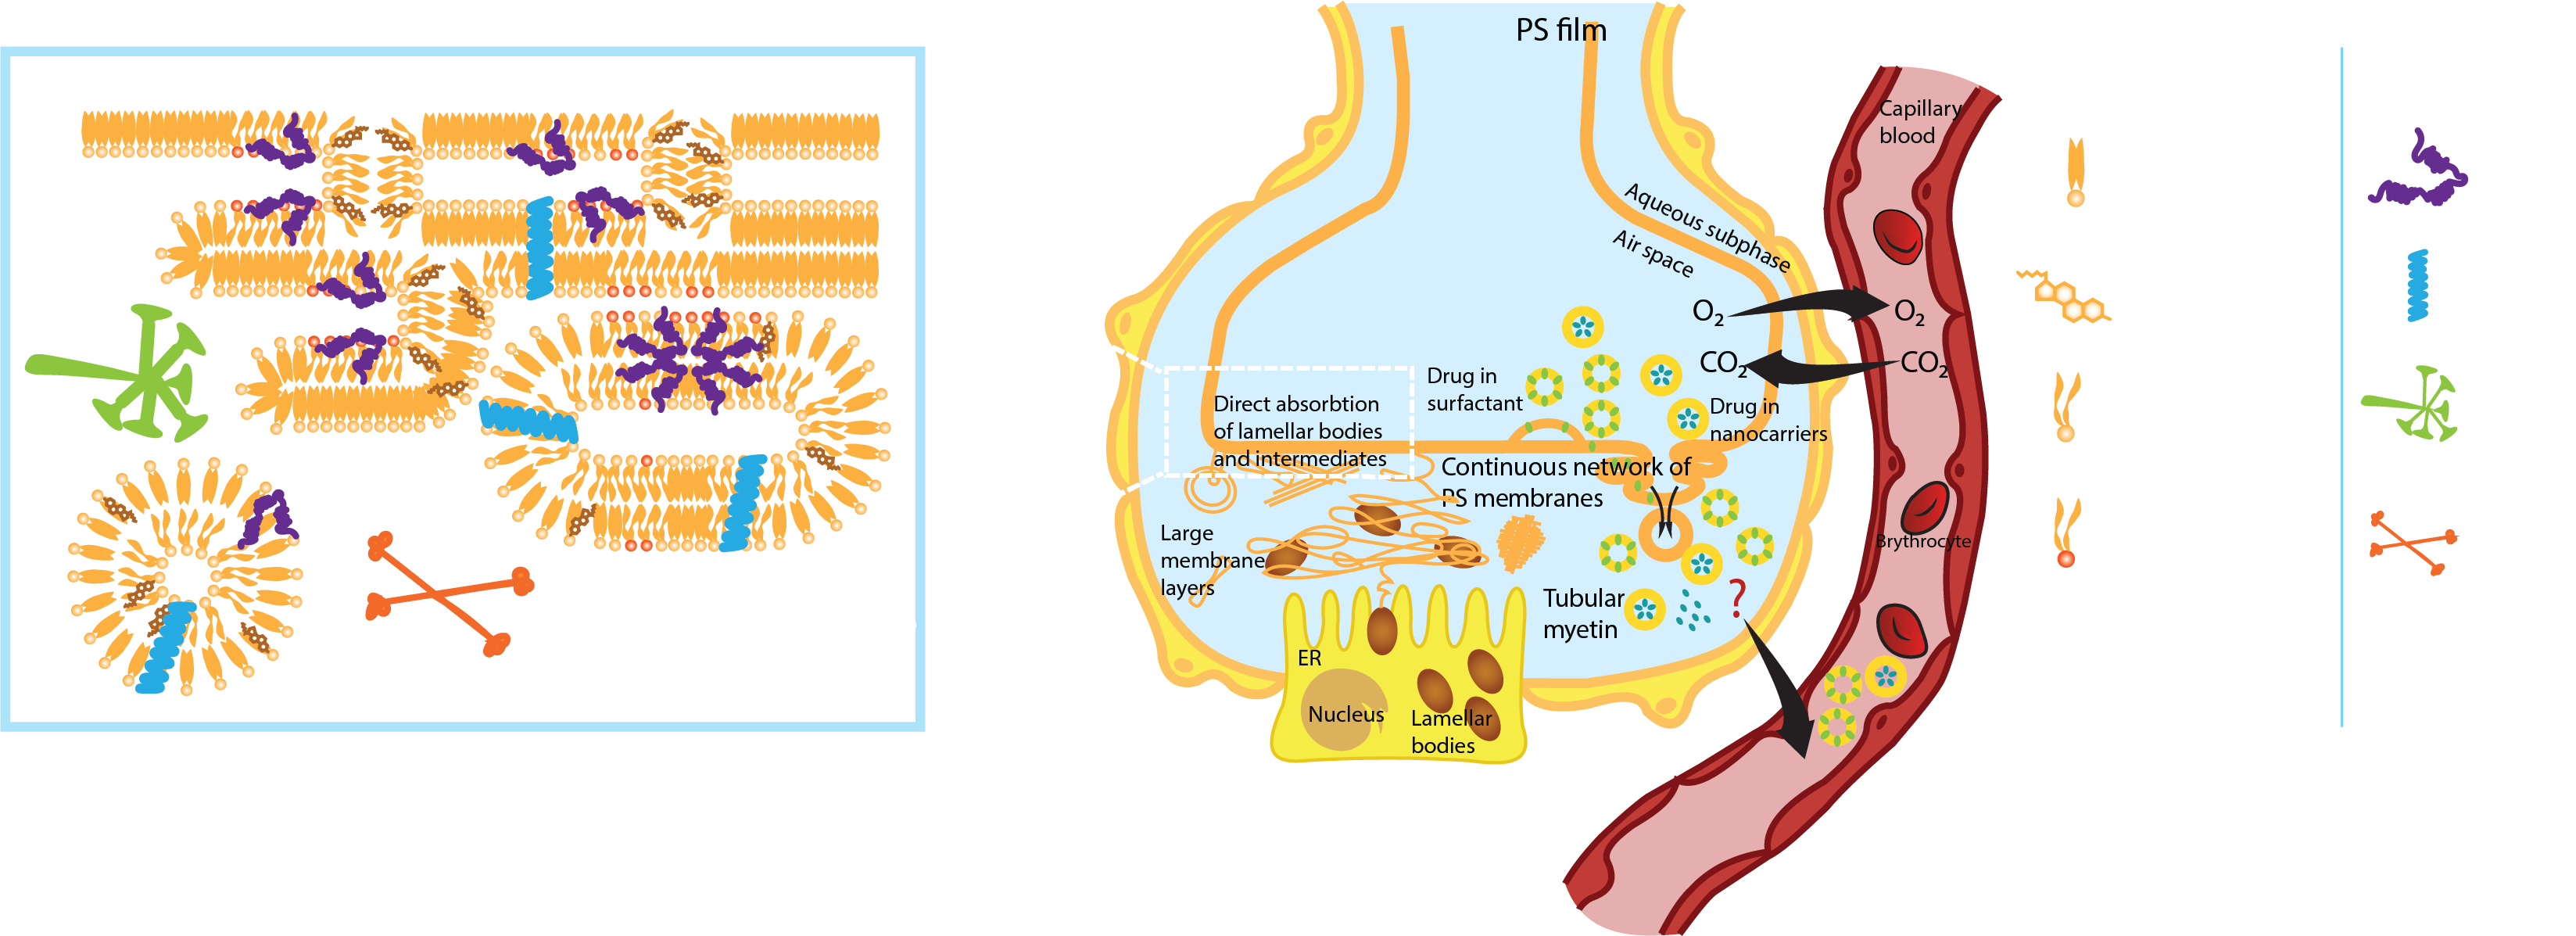 A schematic showing the major components of the Pulmonary Surfactant system, located at the air-water interface lining the alveoli.